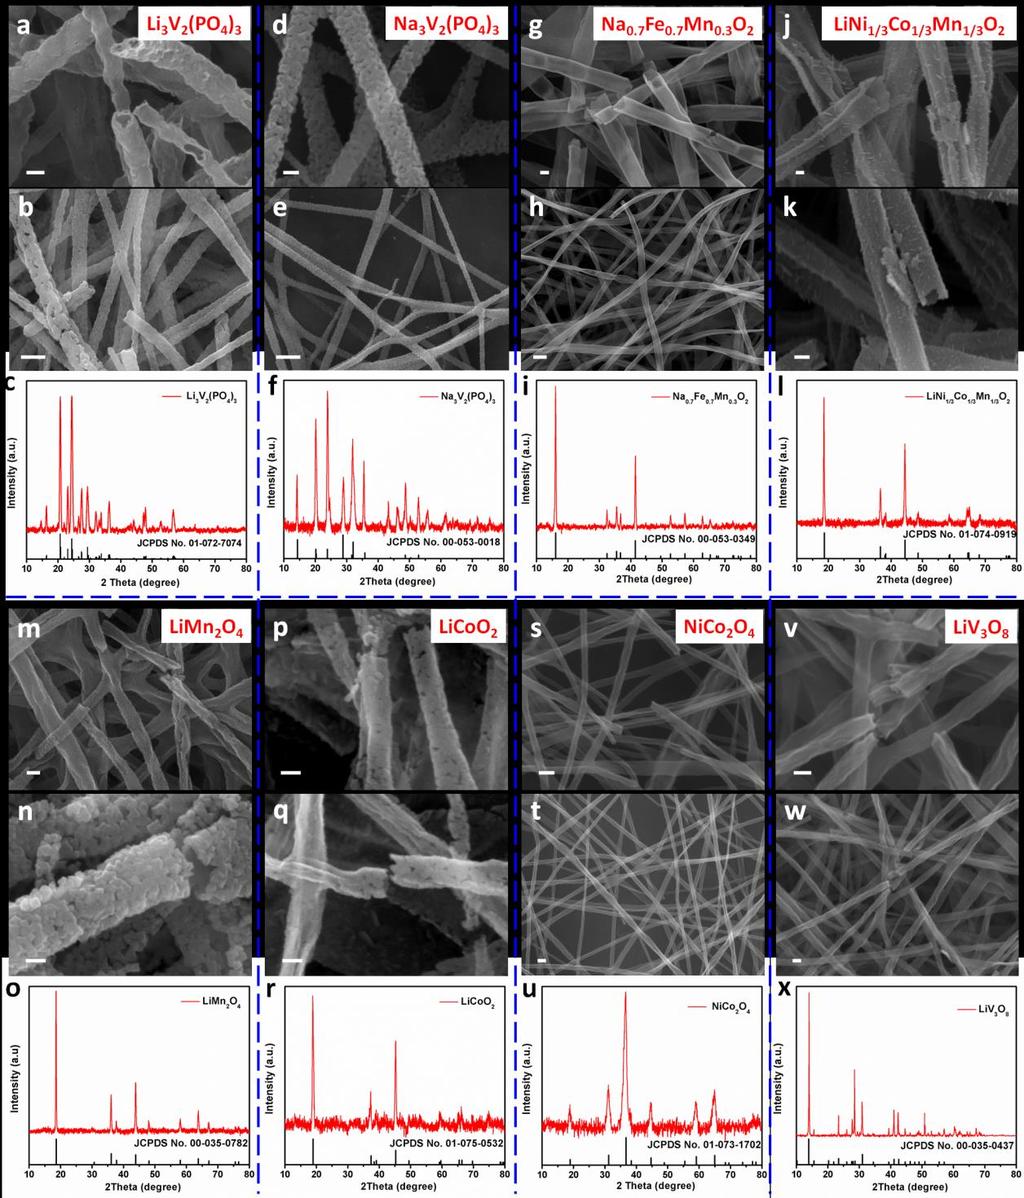 Supplementary Figure 2 SEM images and XRD patterns of multi-element oxides, Li 3 V 2 (PO 4 ) 3 (a-c), Na 3 V 2 (PO 4 ) 3 (d-f), Na 0.7 Fe 0.7 Mn 0.